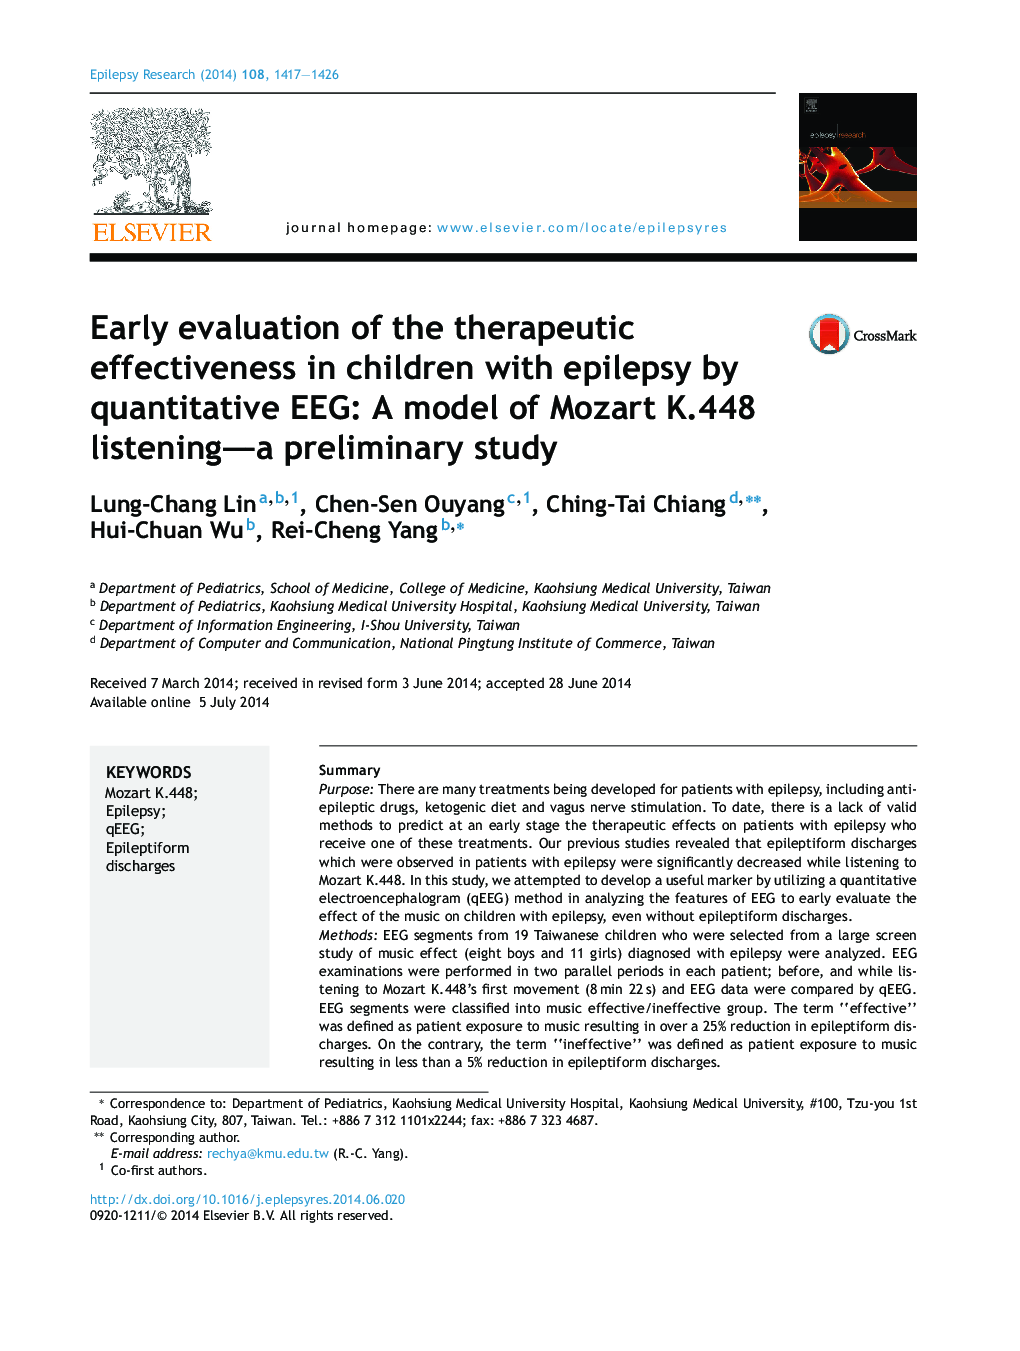 Early evaluation of the therapeutic effectiveness in children with epilepsy by quantitative EEG: A model of Mozart K.448 listening—a preliminary study